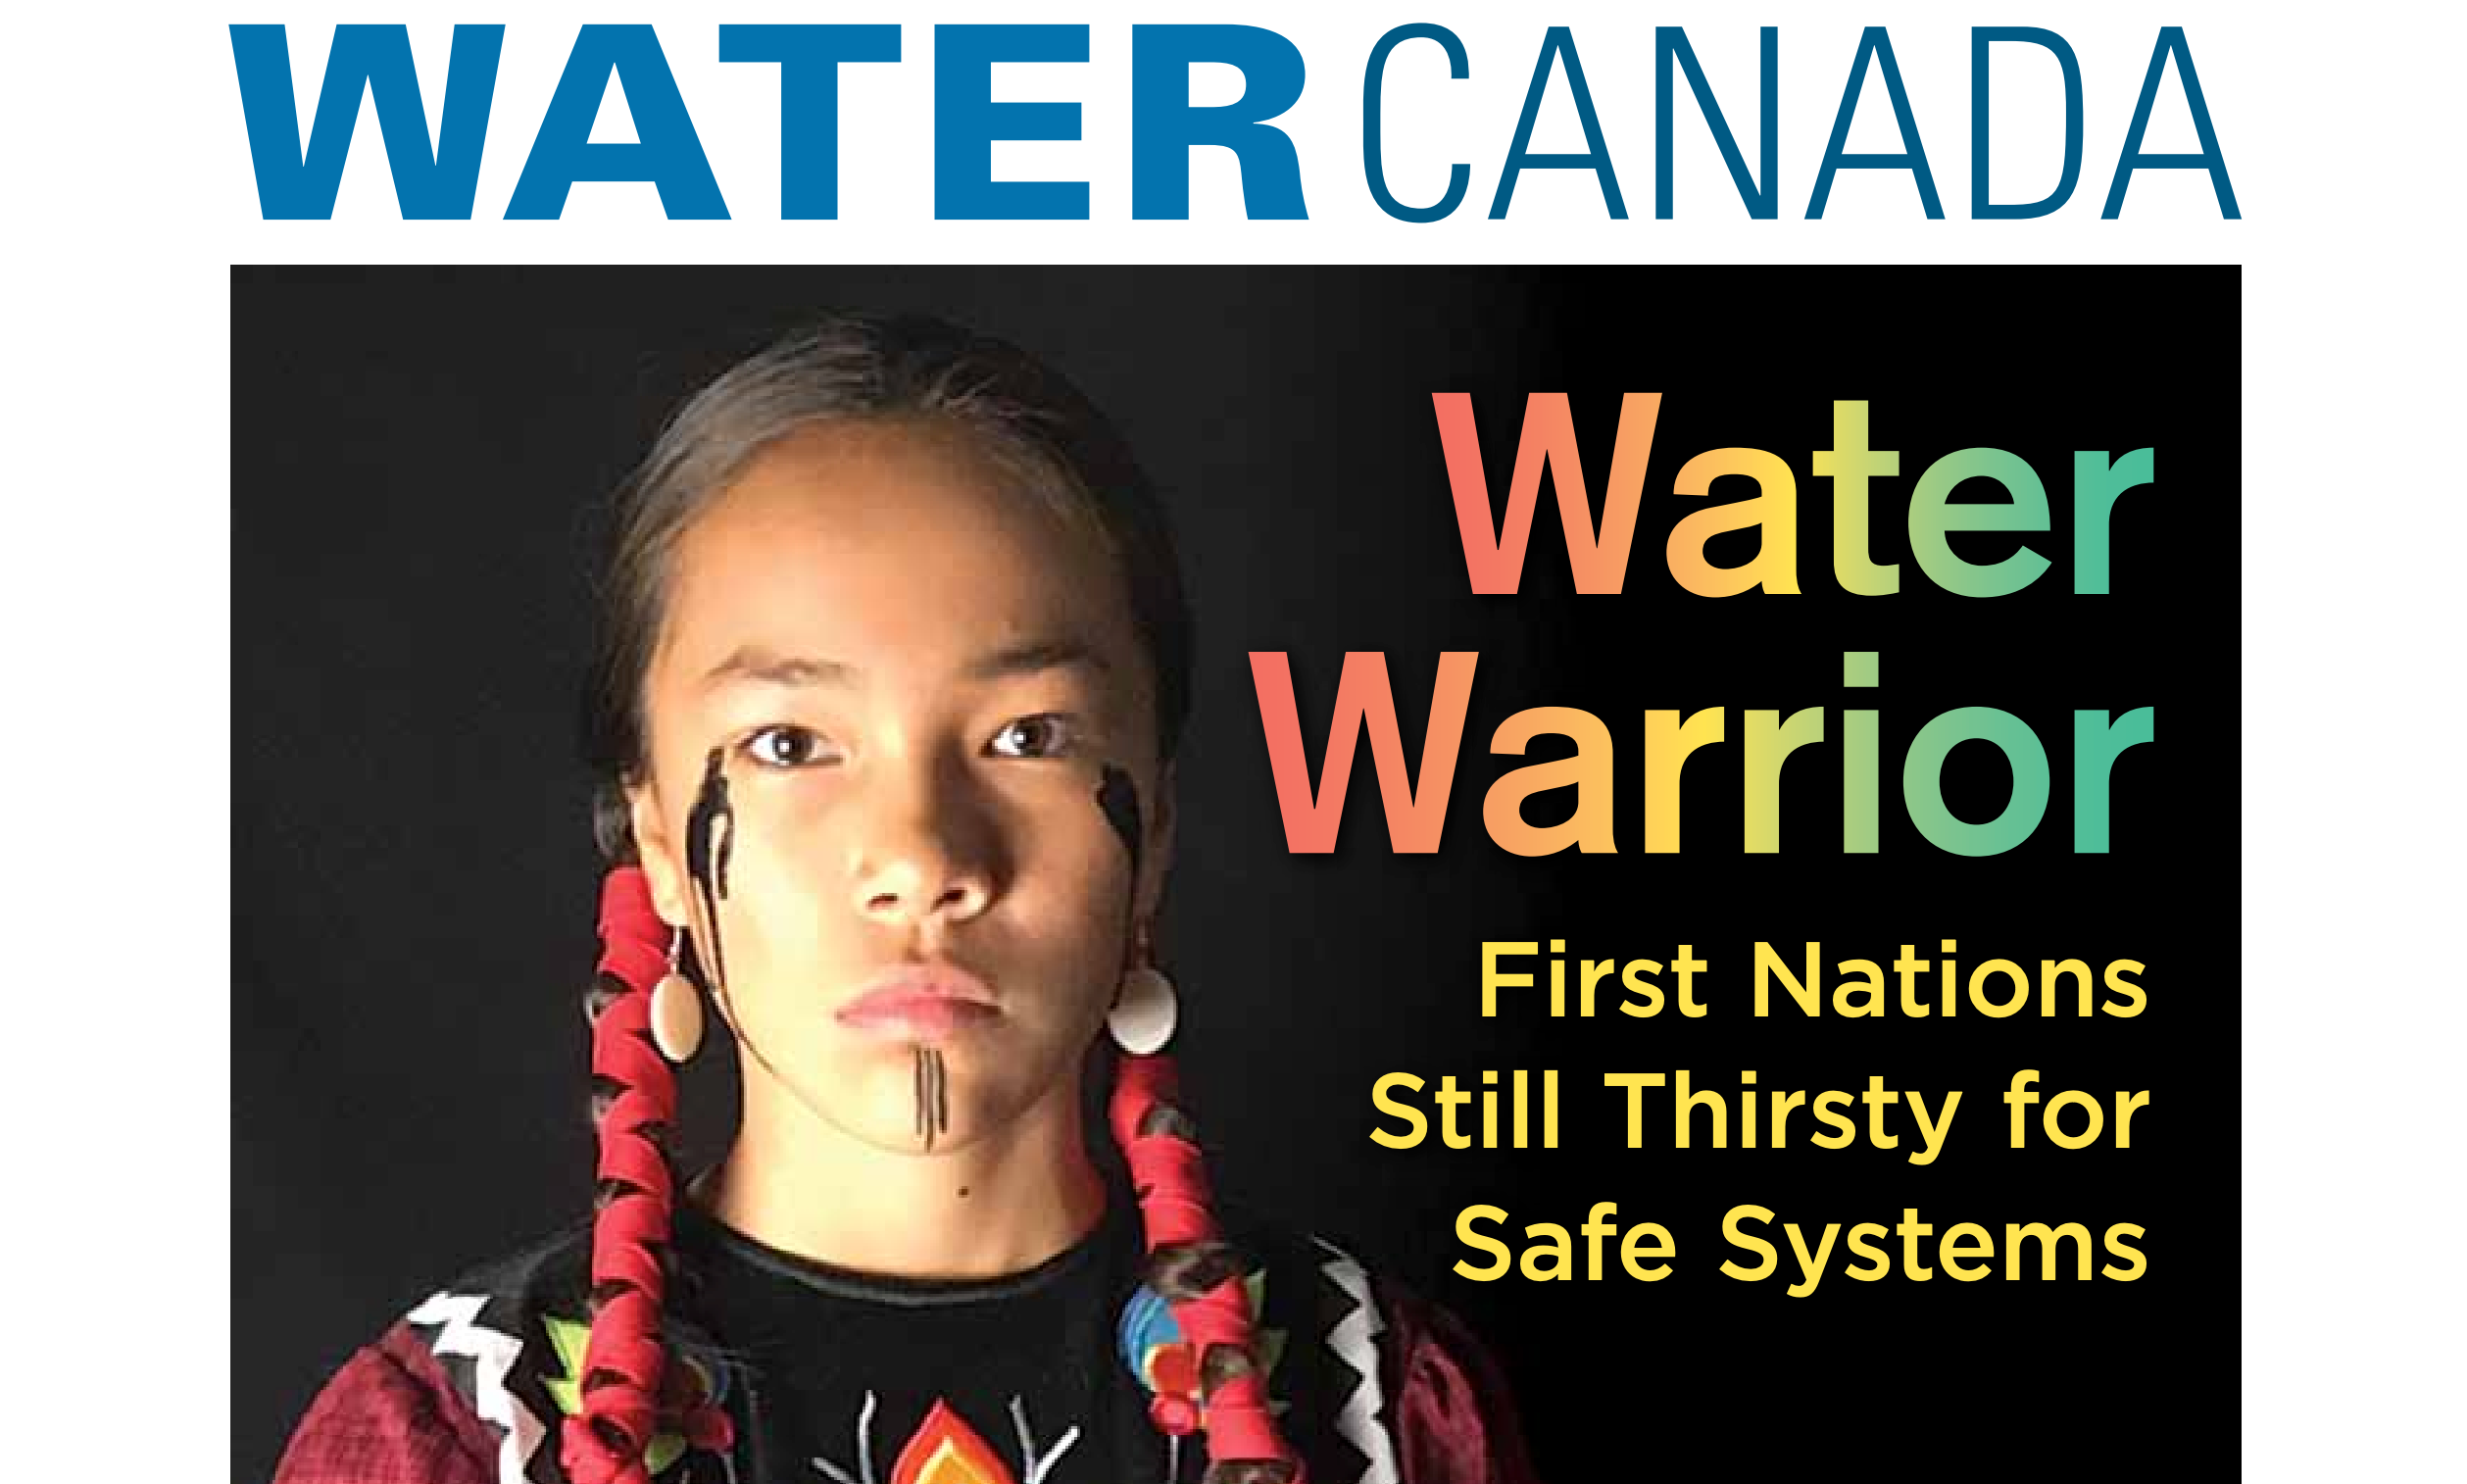 Cover of Water Canada magazine